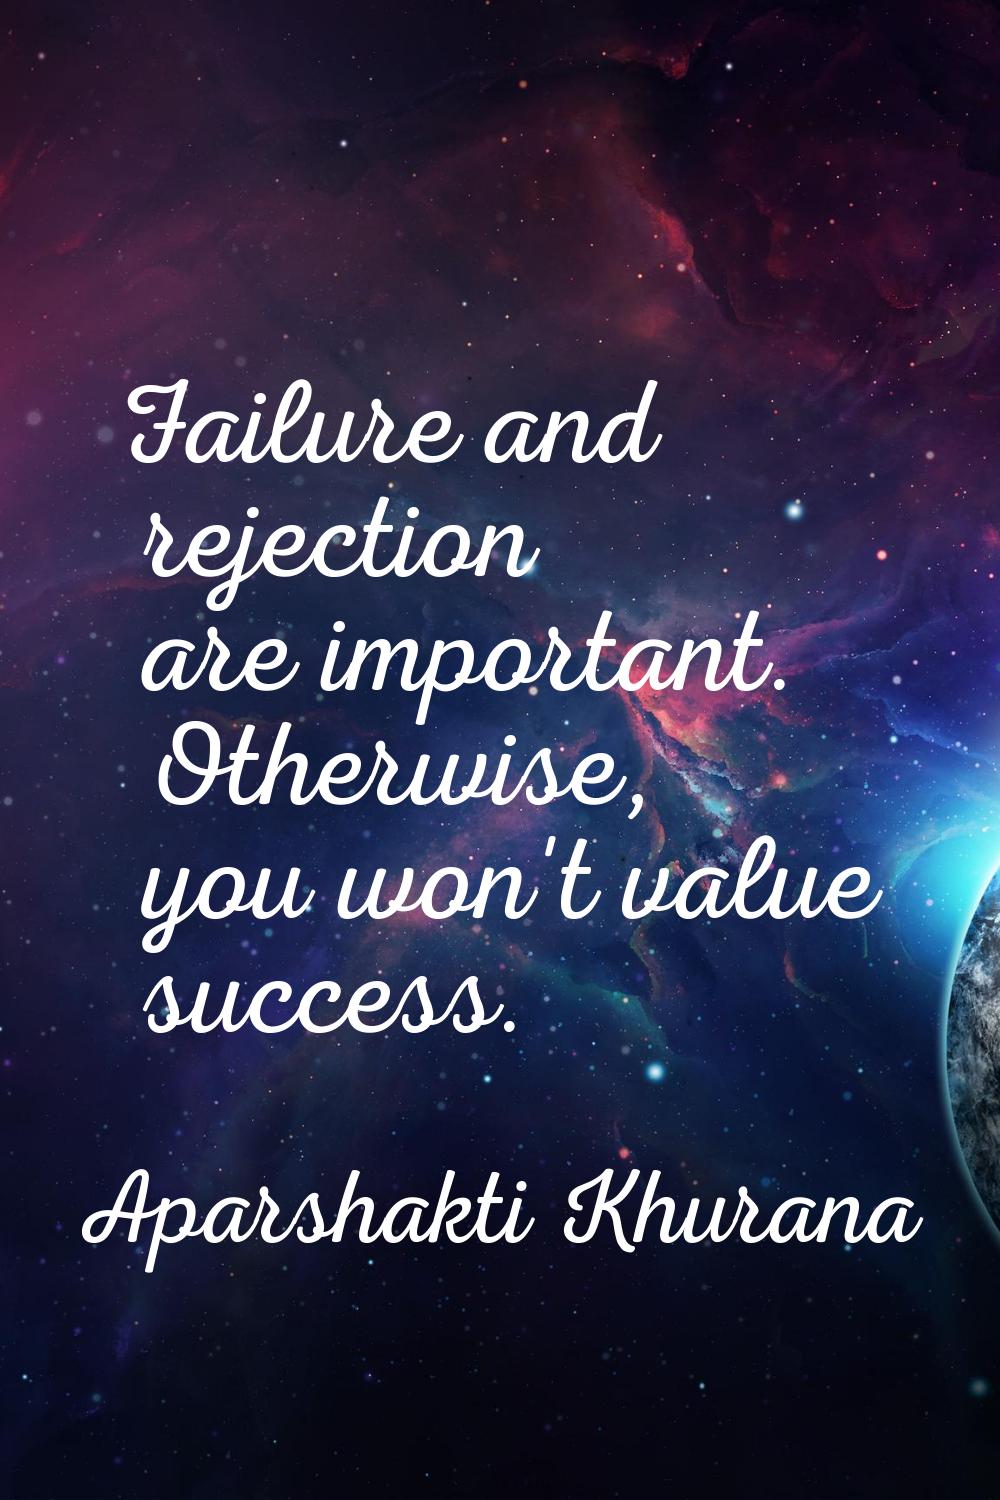 Failure and rejection are important. Otherwise, you won't value success.